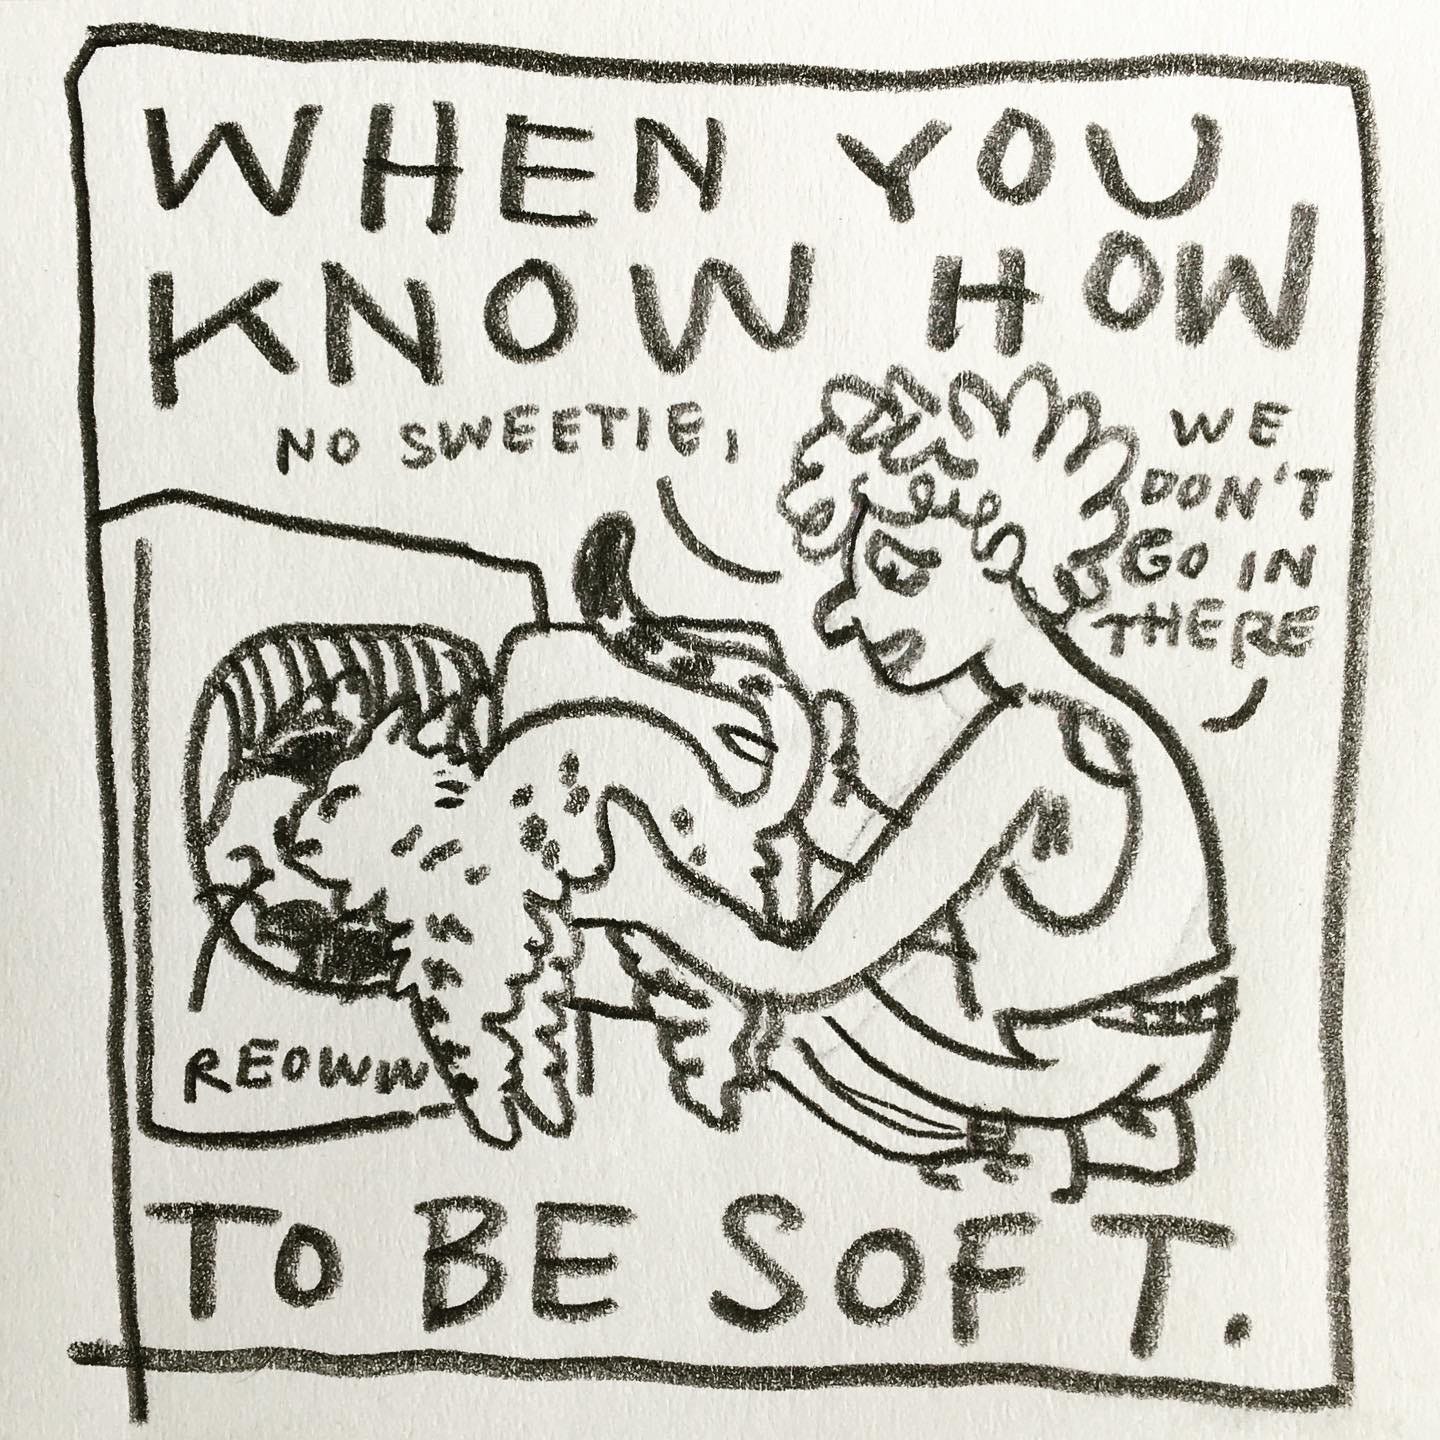 Panel 4: when you know how to be soft. Image: Lark lifts the striped cat out of the drying machine. The cat has a raised tail and an angry face, saying “REOWW.” Lark looks sympathetic, saying "no sweetie, we don't go in there"